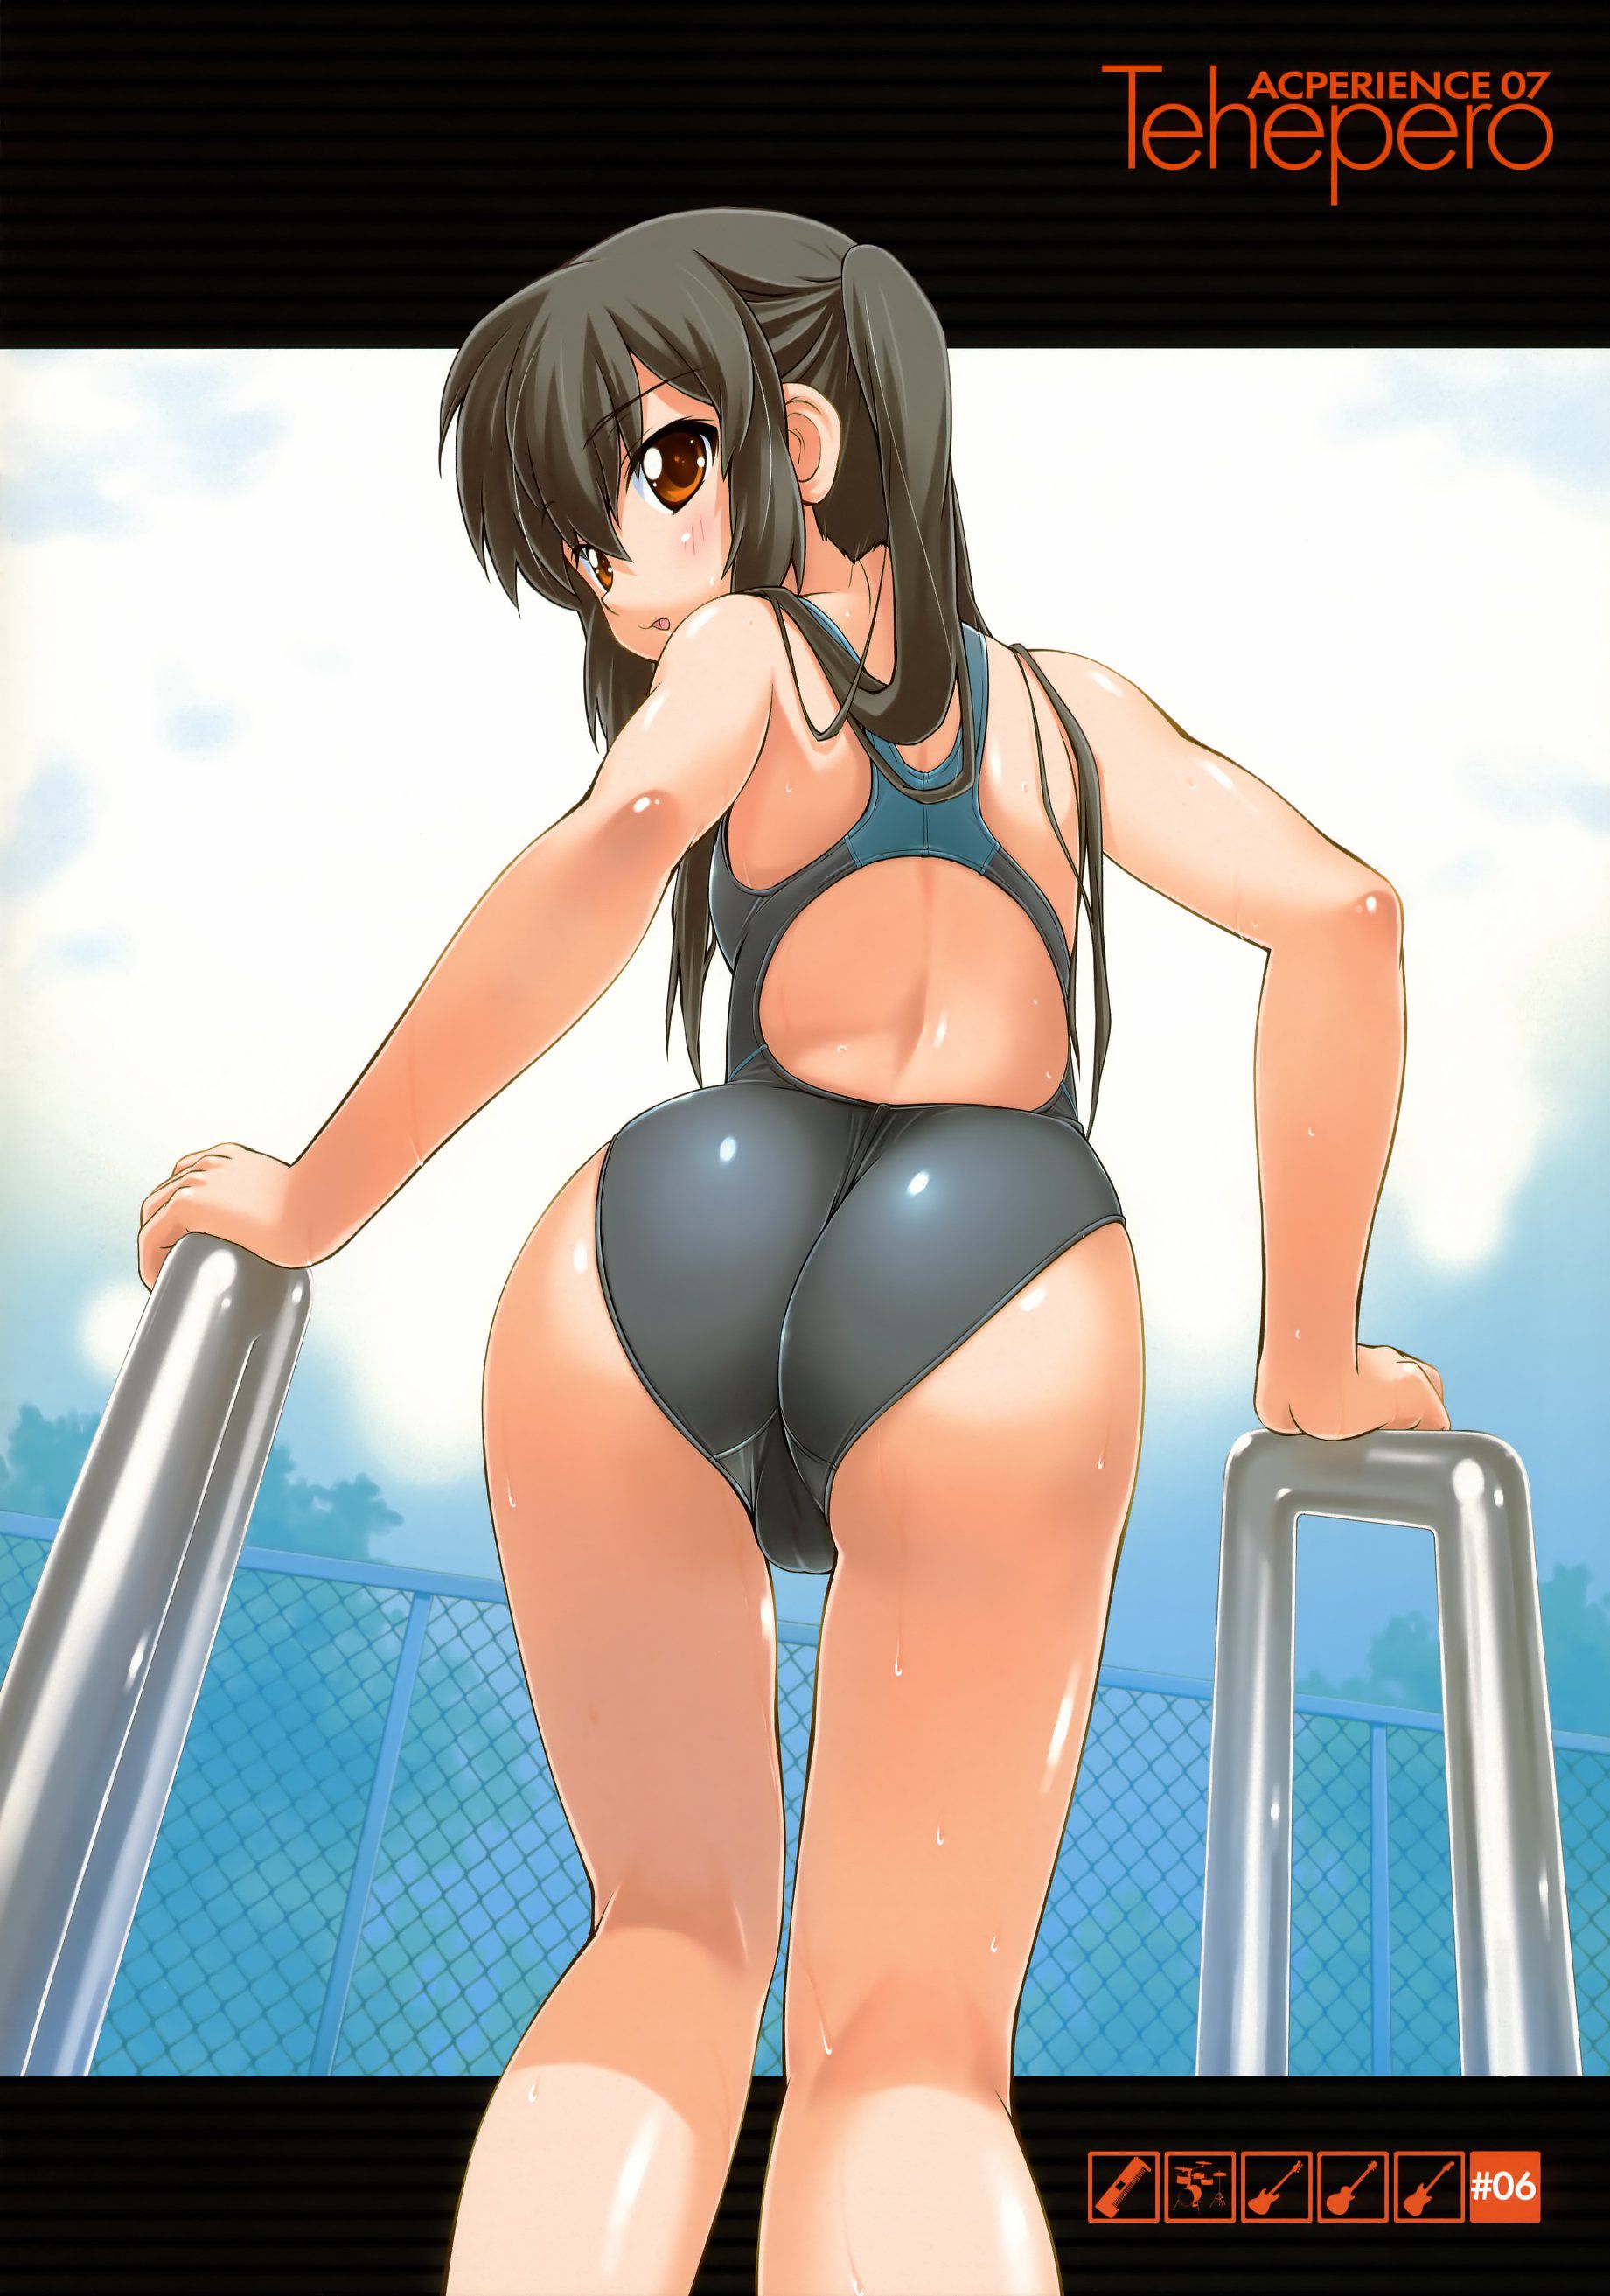 Secondary erotic image of a girl odious Chile stuffy thighs wwww part2 10